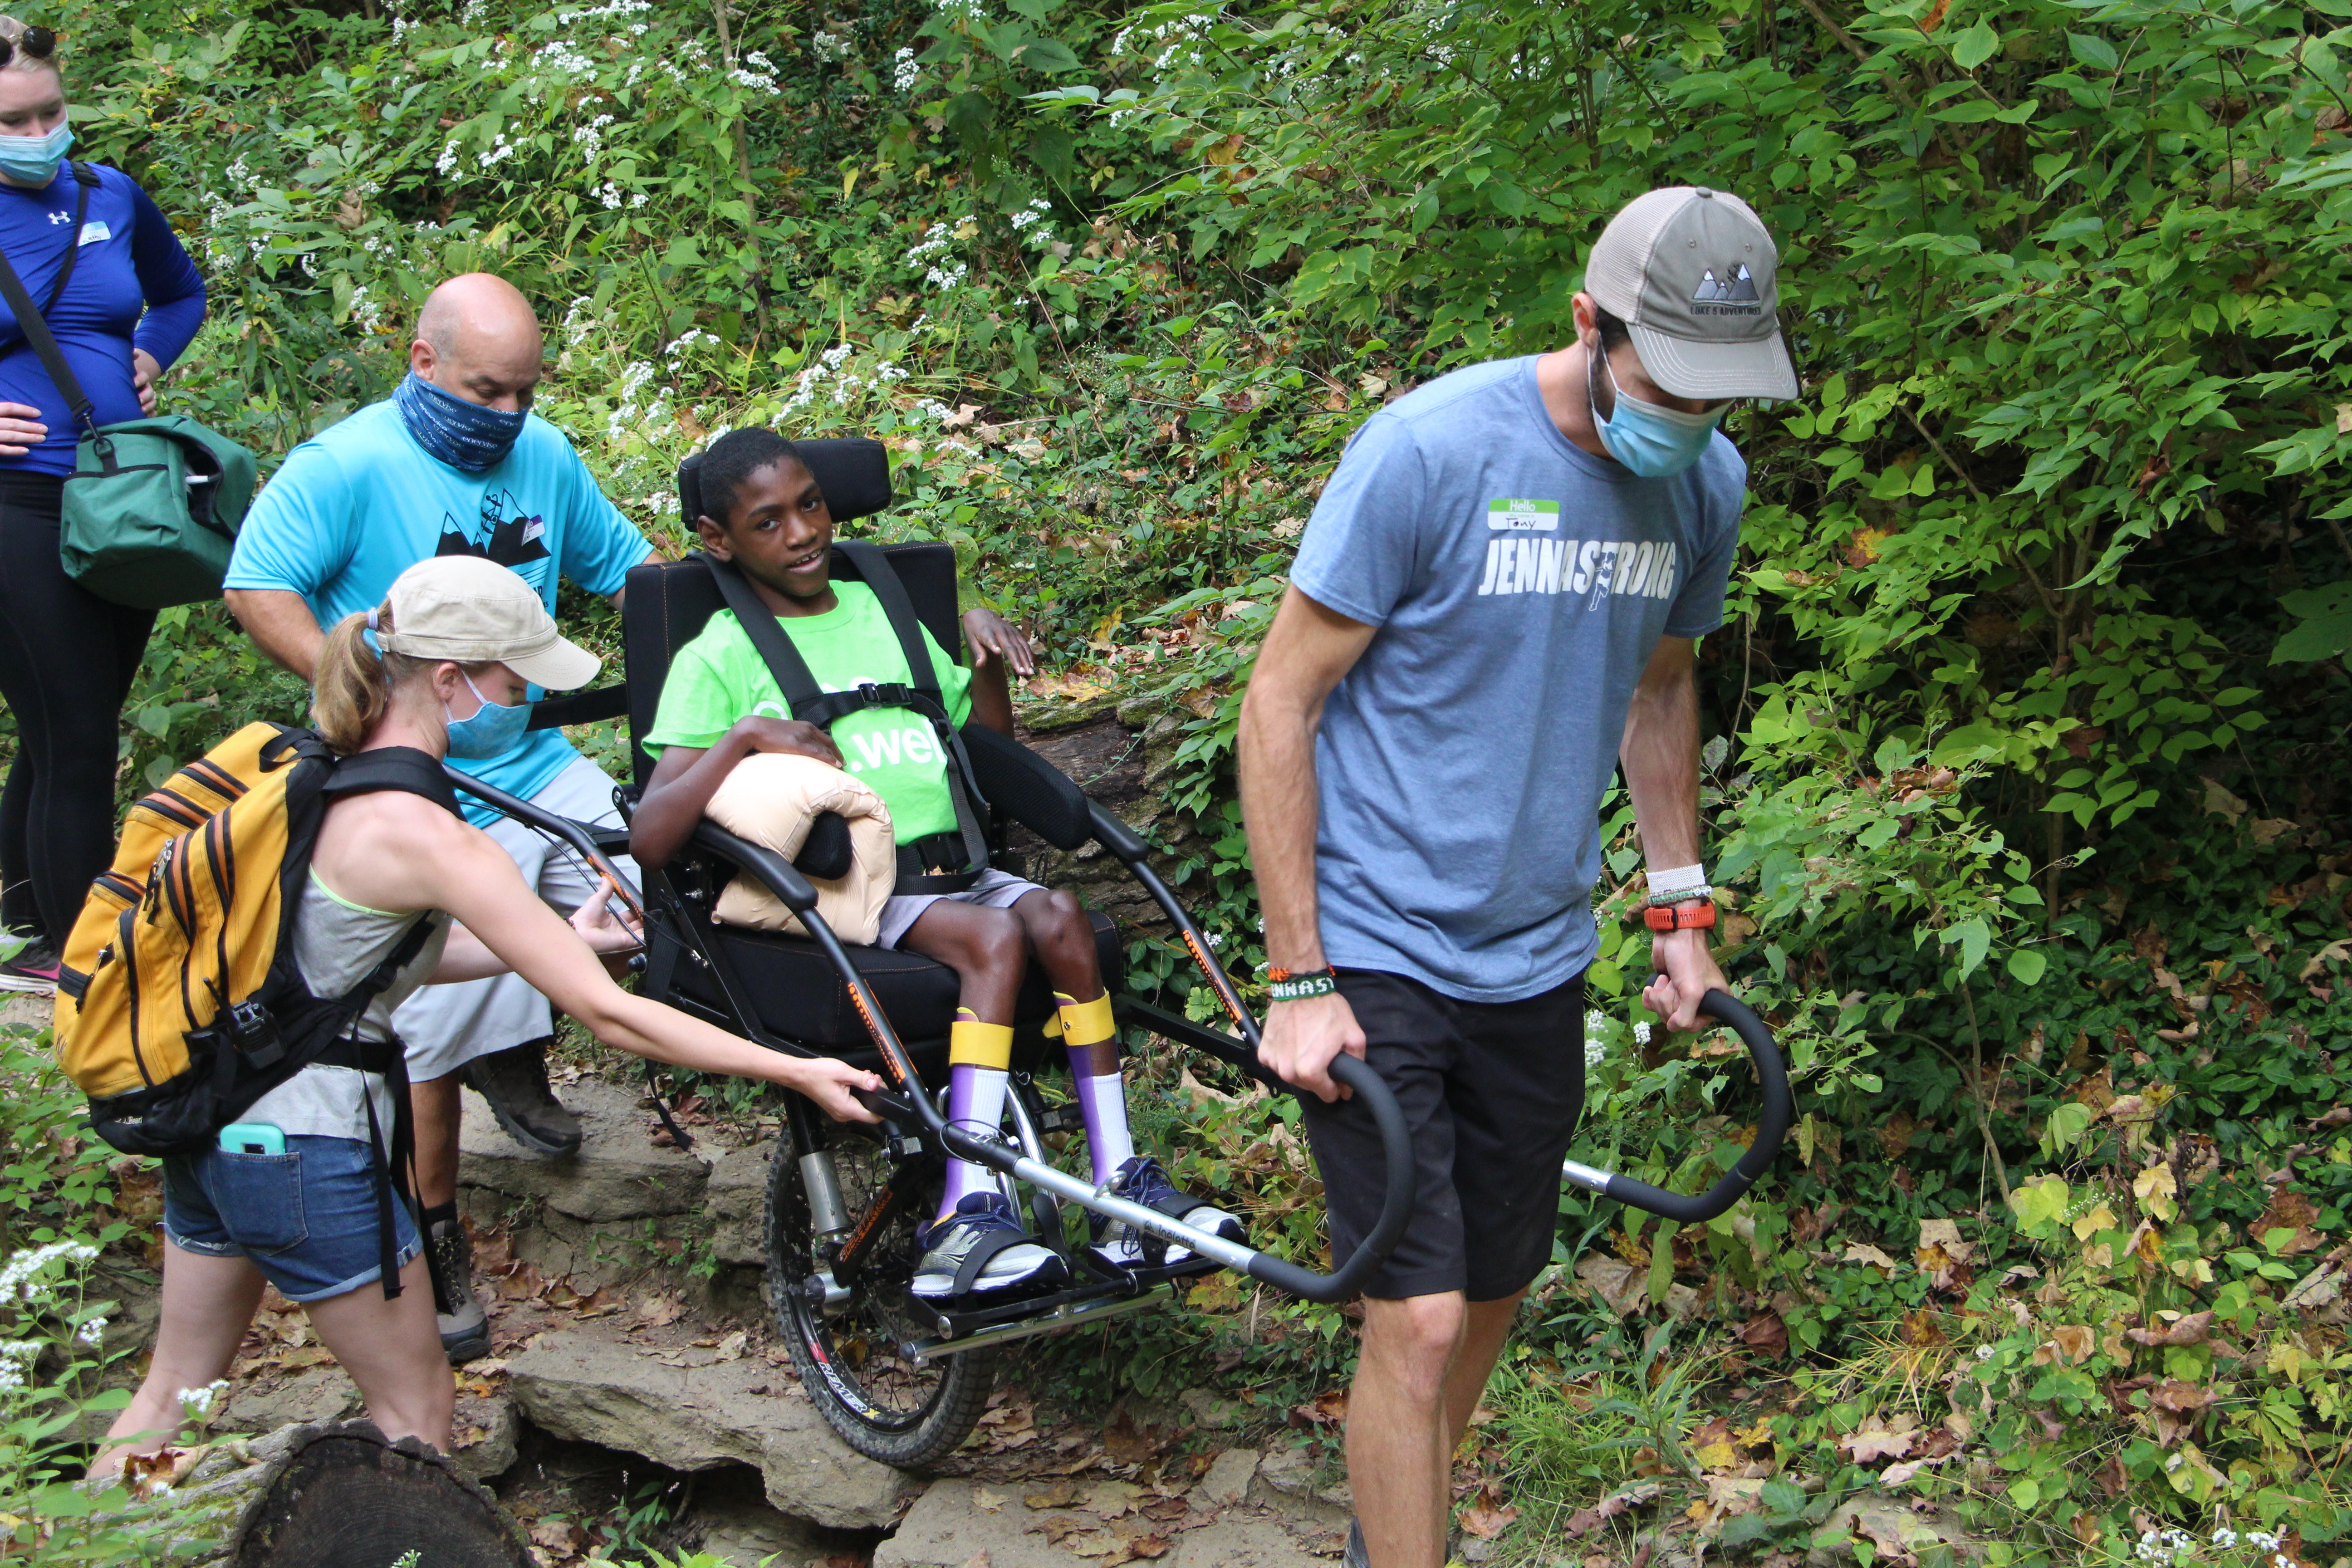 Child in an all-terrain wheelchair crossing over a rocky terrain with the assistance of 3 adults.